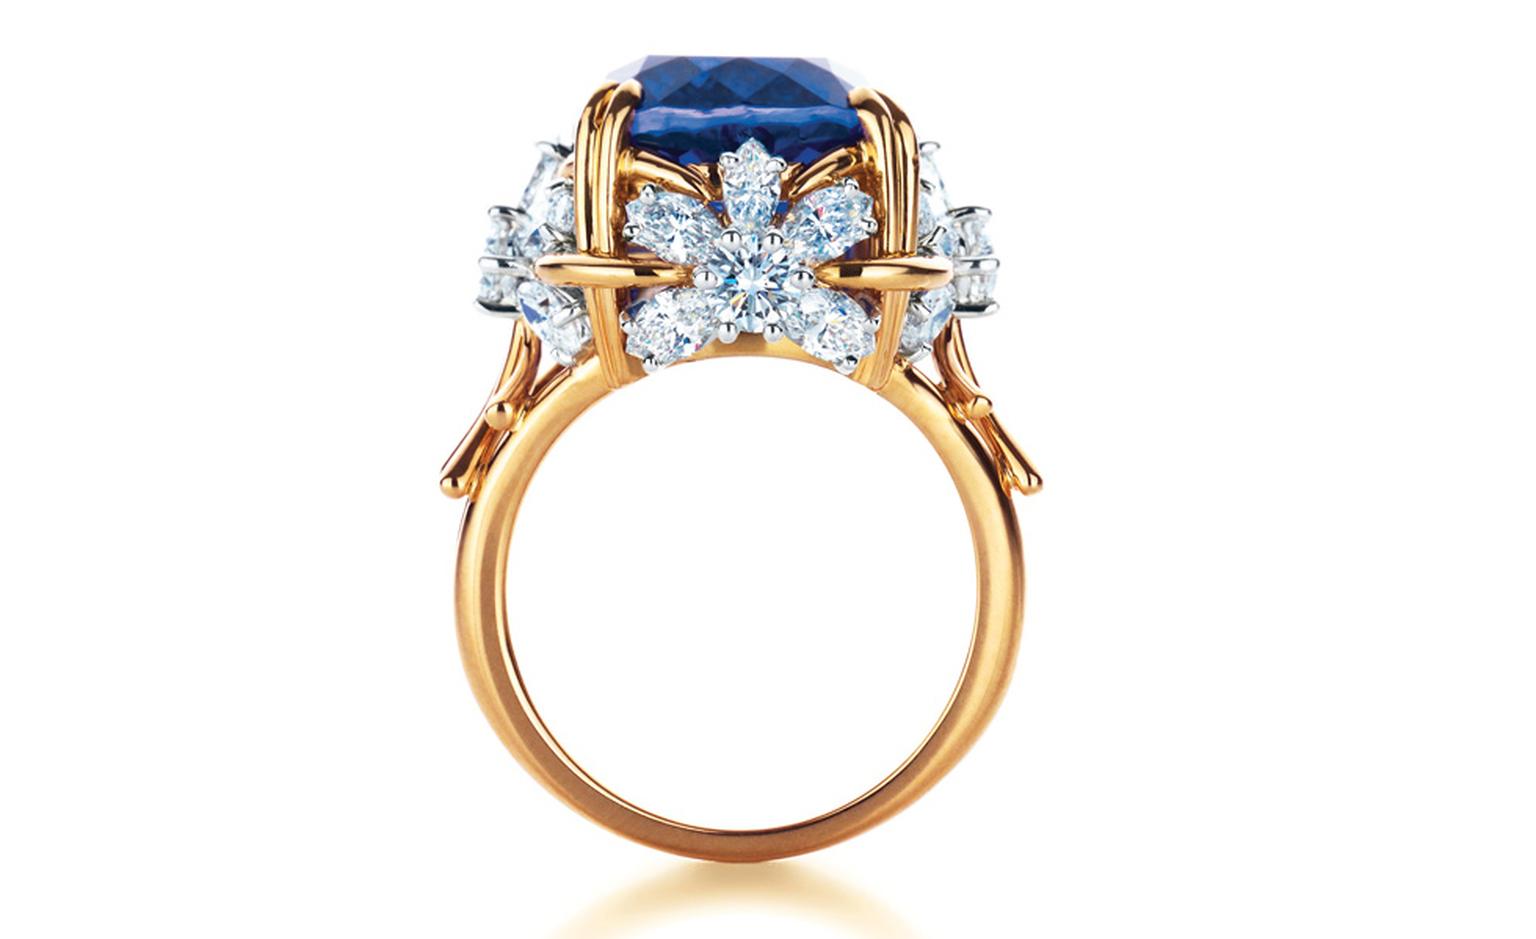 Tiffany & Co Schlumberger Flower ring with tanzanite and diamonds £44,000